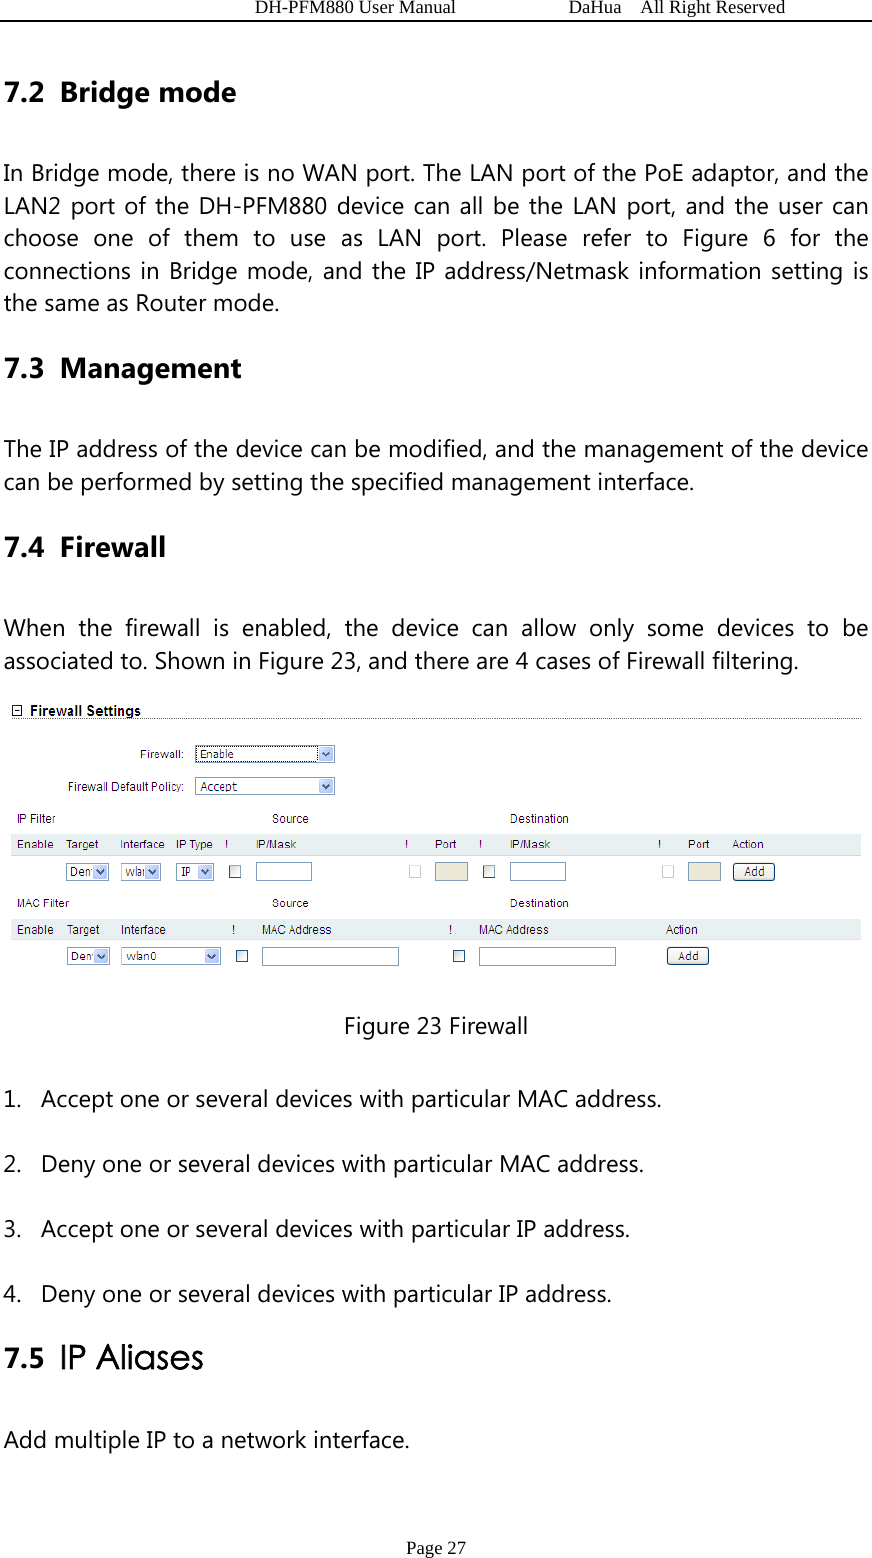   DH-PFM880 User Manual            DaHua  All Right Reserved Page 27 7.2 Bridge mode In Bridge mode, there is no WAN port. The LAN port of the PoE adaptor, and the LAN2 port of the DH-PFM880 device can all be the LAN port, and the user can choose one of them to use as LAN port. Please refer to Figure 6 for the connections in Bridge mode, and the IP address/Netmask information setting is the same as Router mode. 7.3 Management      The IP address of the device can be modified, and the management of the device can be performed by setting the specified management interface. 7.4 Firewall When the firewall is enabled, the device can allow only some devices to be associated to. Shown in Figure 23, and there are 4 cases of Firewall filtering.    Figure 23 Firewall 1. Accept one or several devices with particular MAC address. 2. Deny one or several devices with particular MAC address. 3. Accept one or several devices with particular IP address. 4. Deny one or several devices with particular IP address. 7.5 IP Aliases   Add multiple IP to a network interface. 